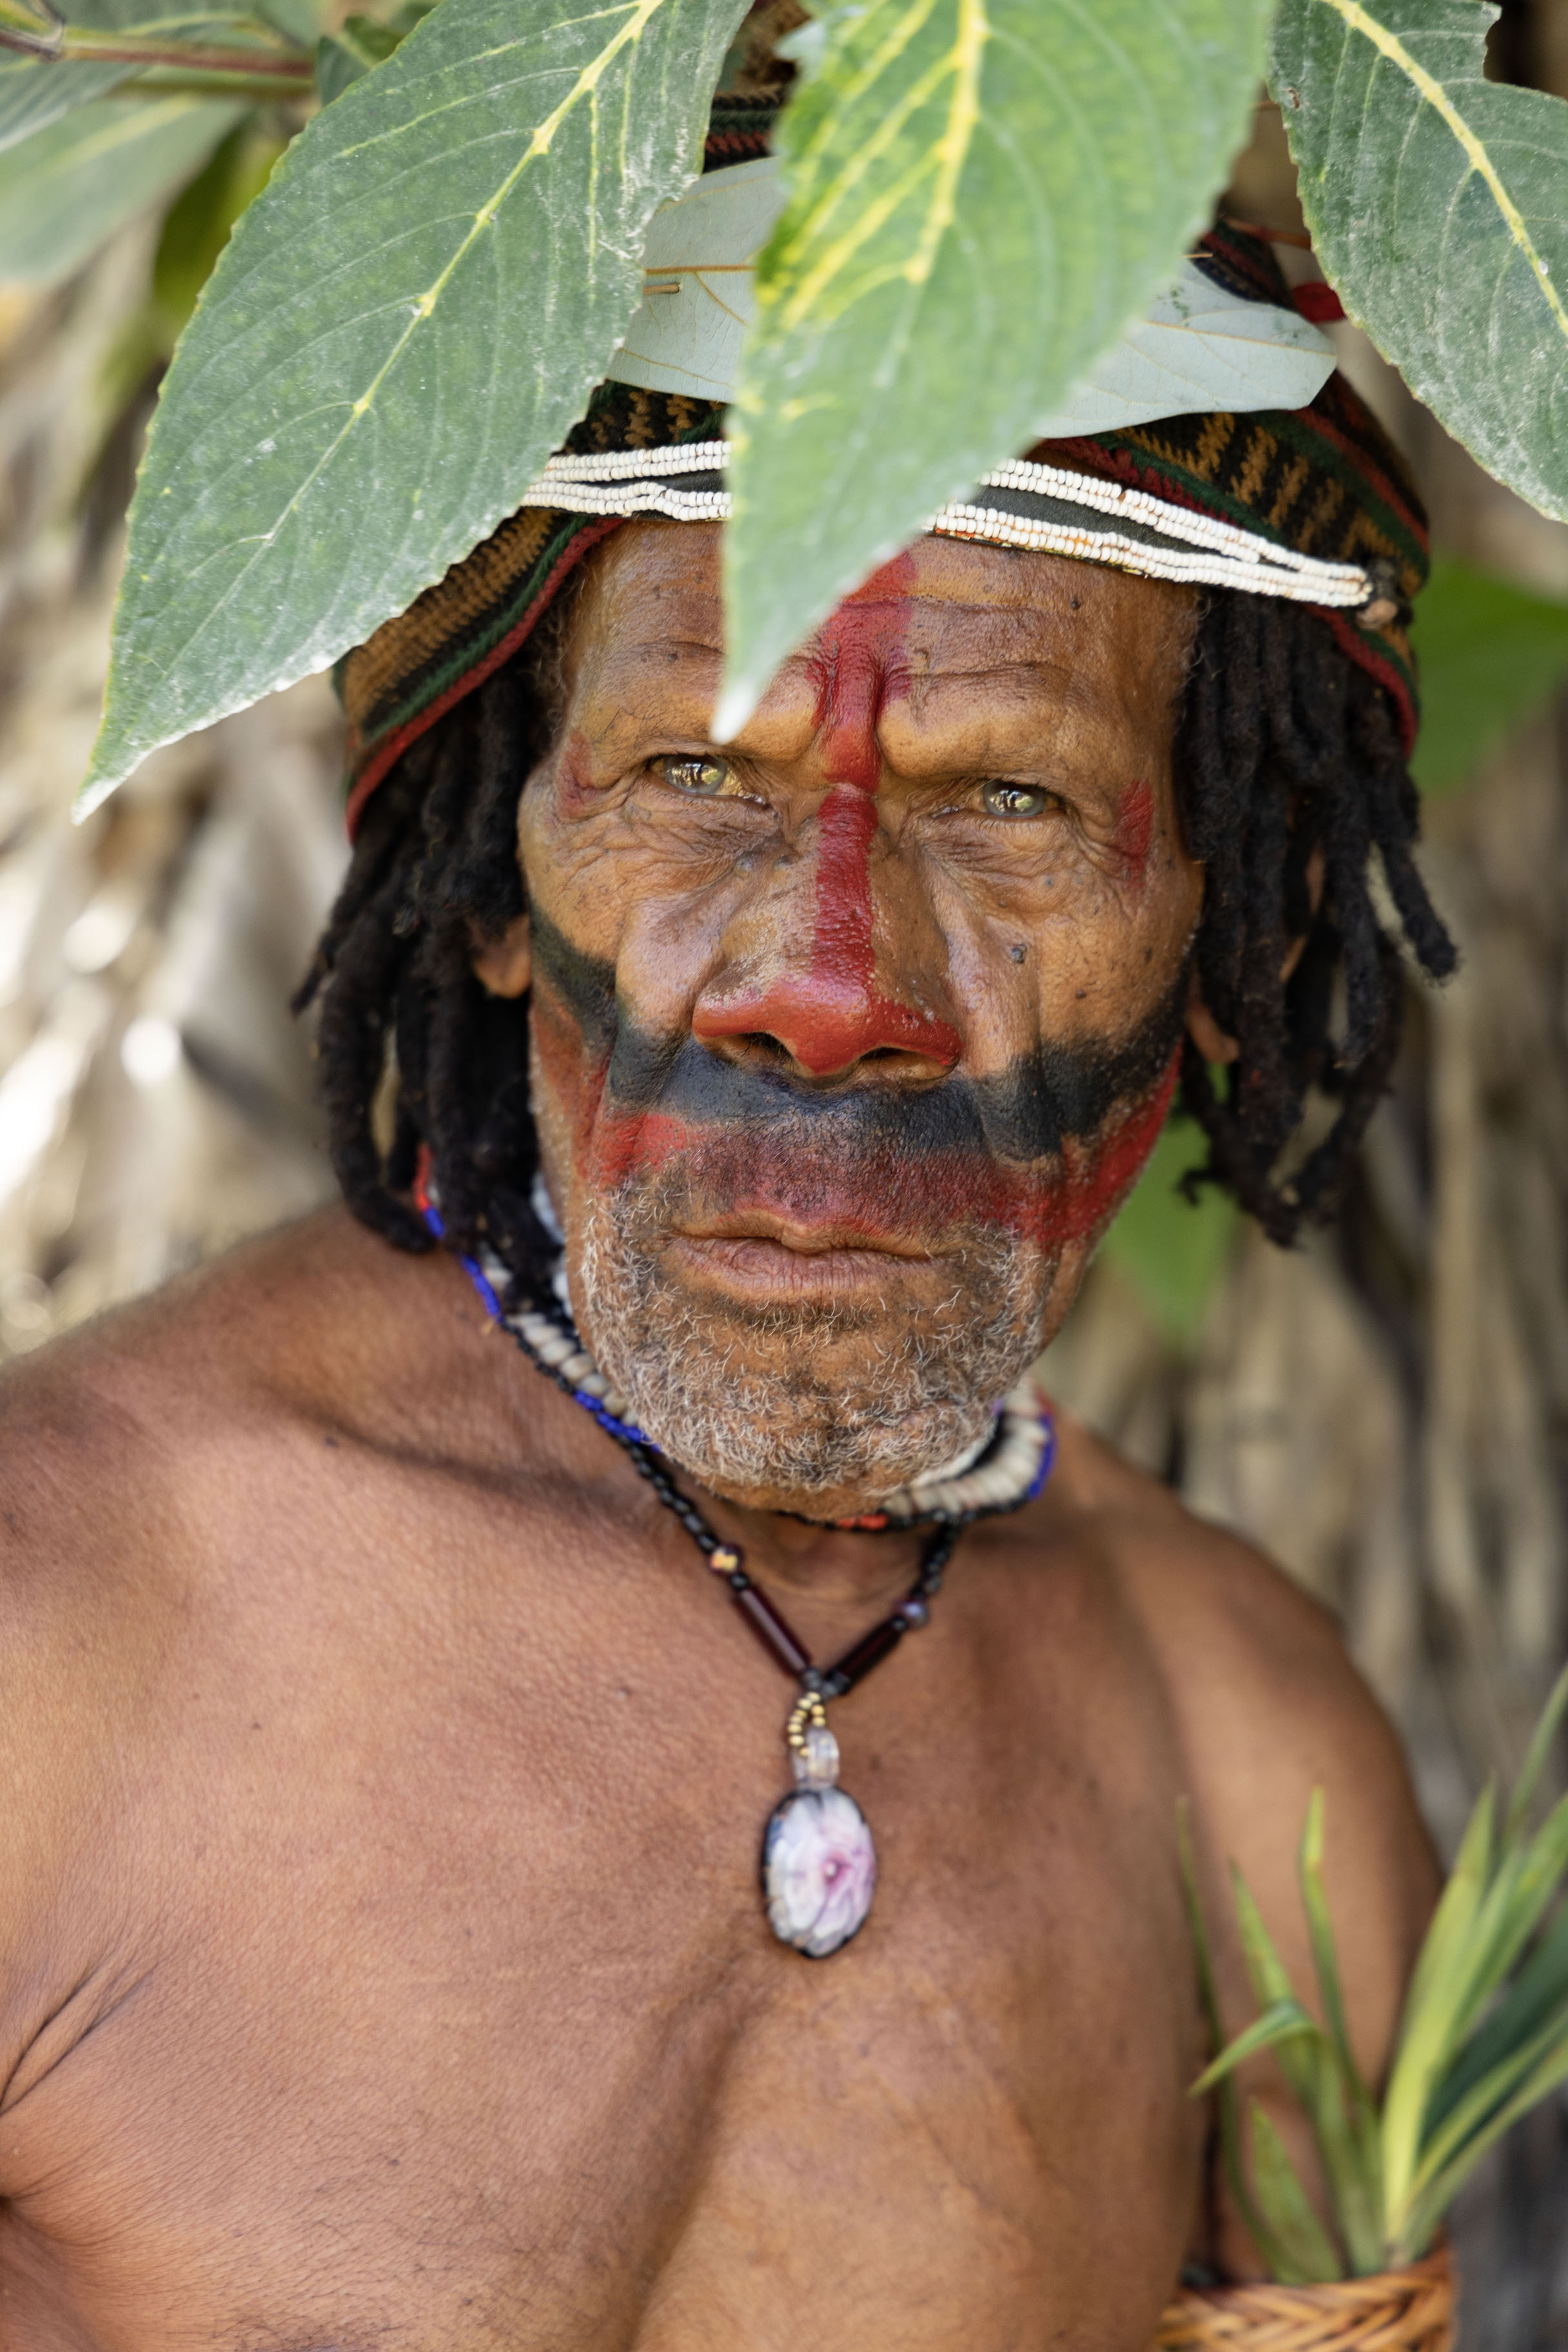 One of the Huli Wigmen with a differently painted face | Huli Wigmen | Papoea Nieuw Guinea